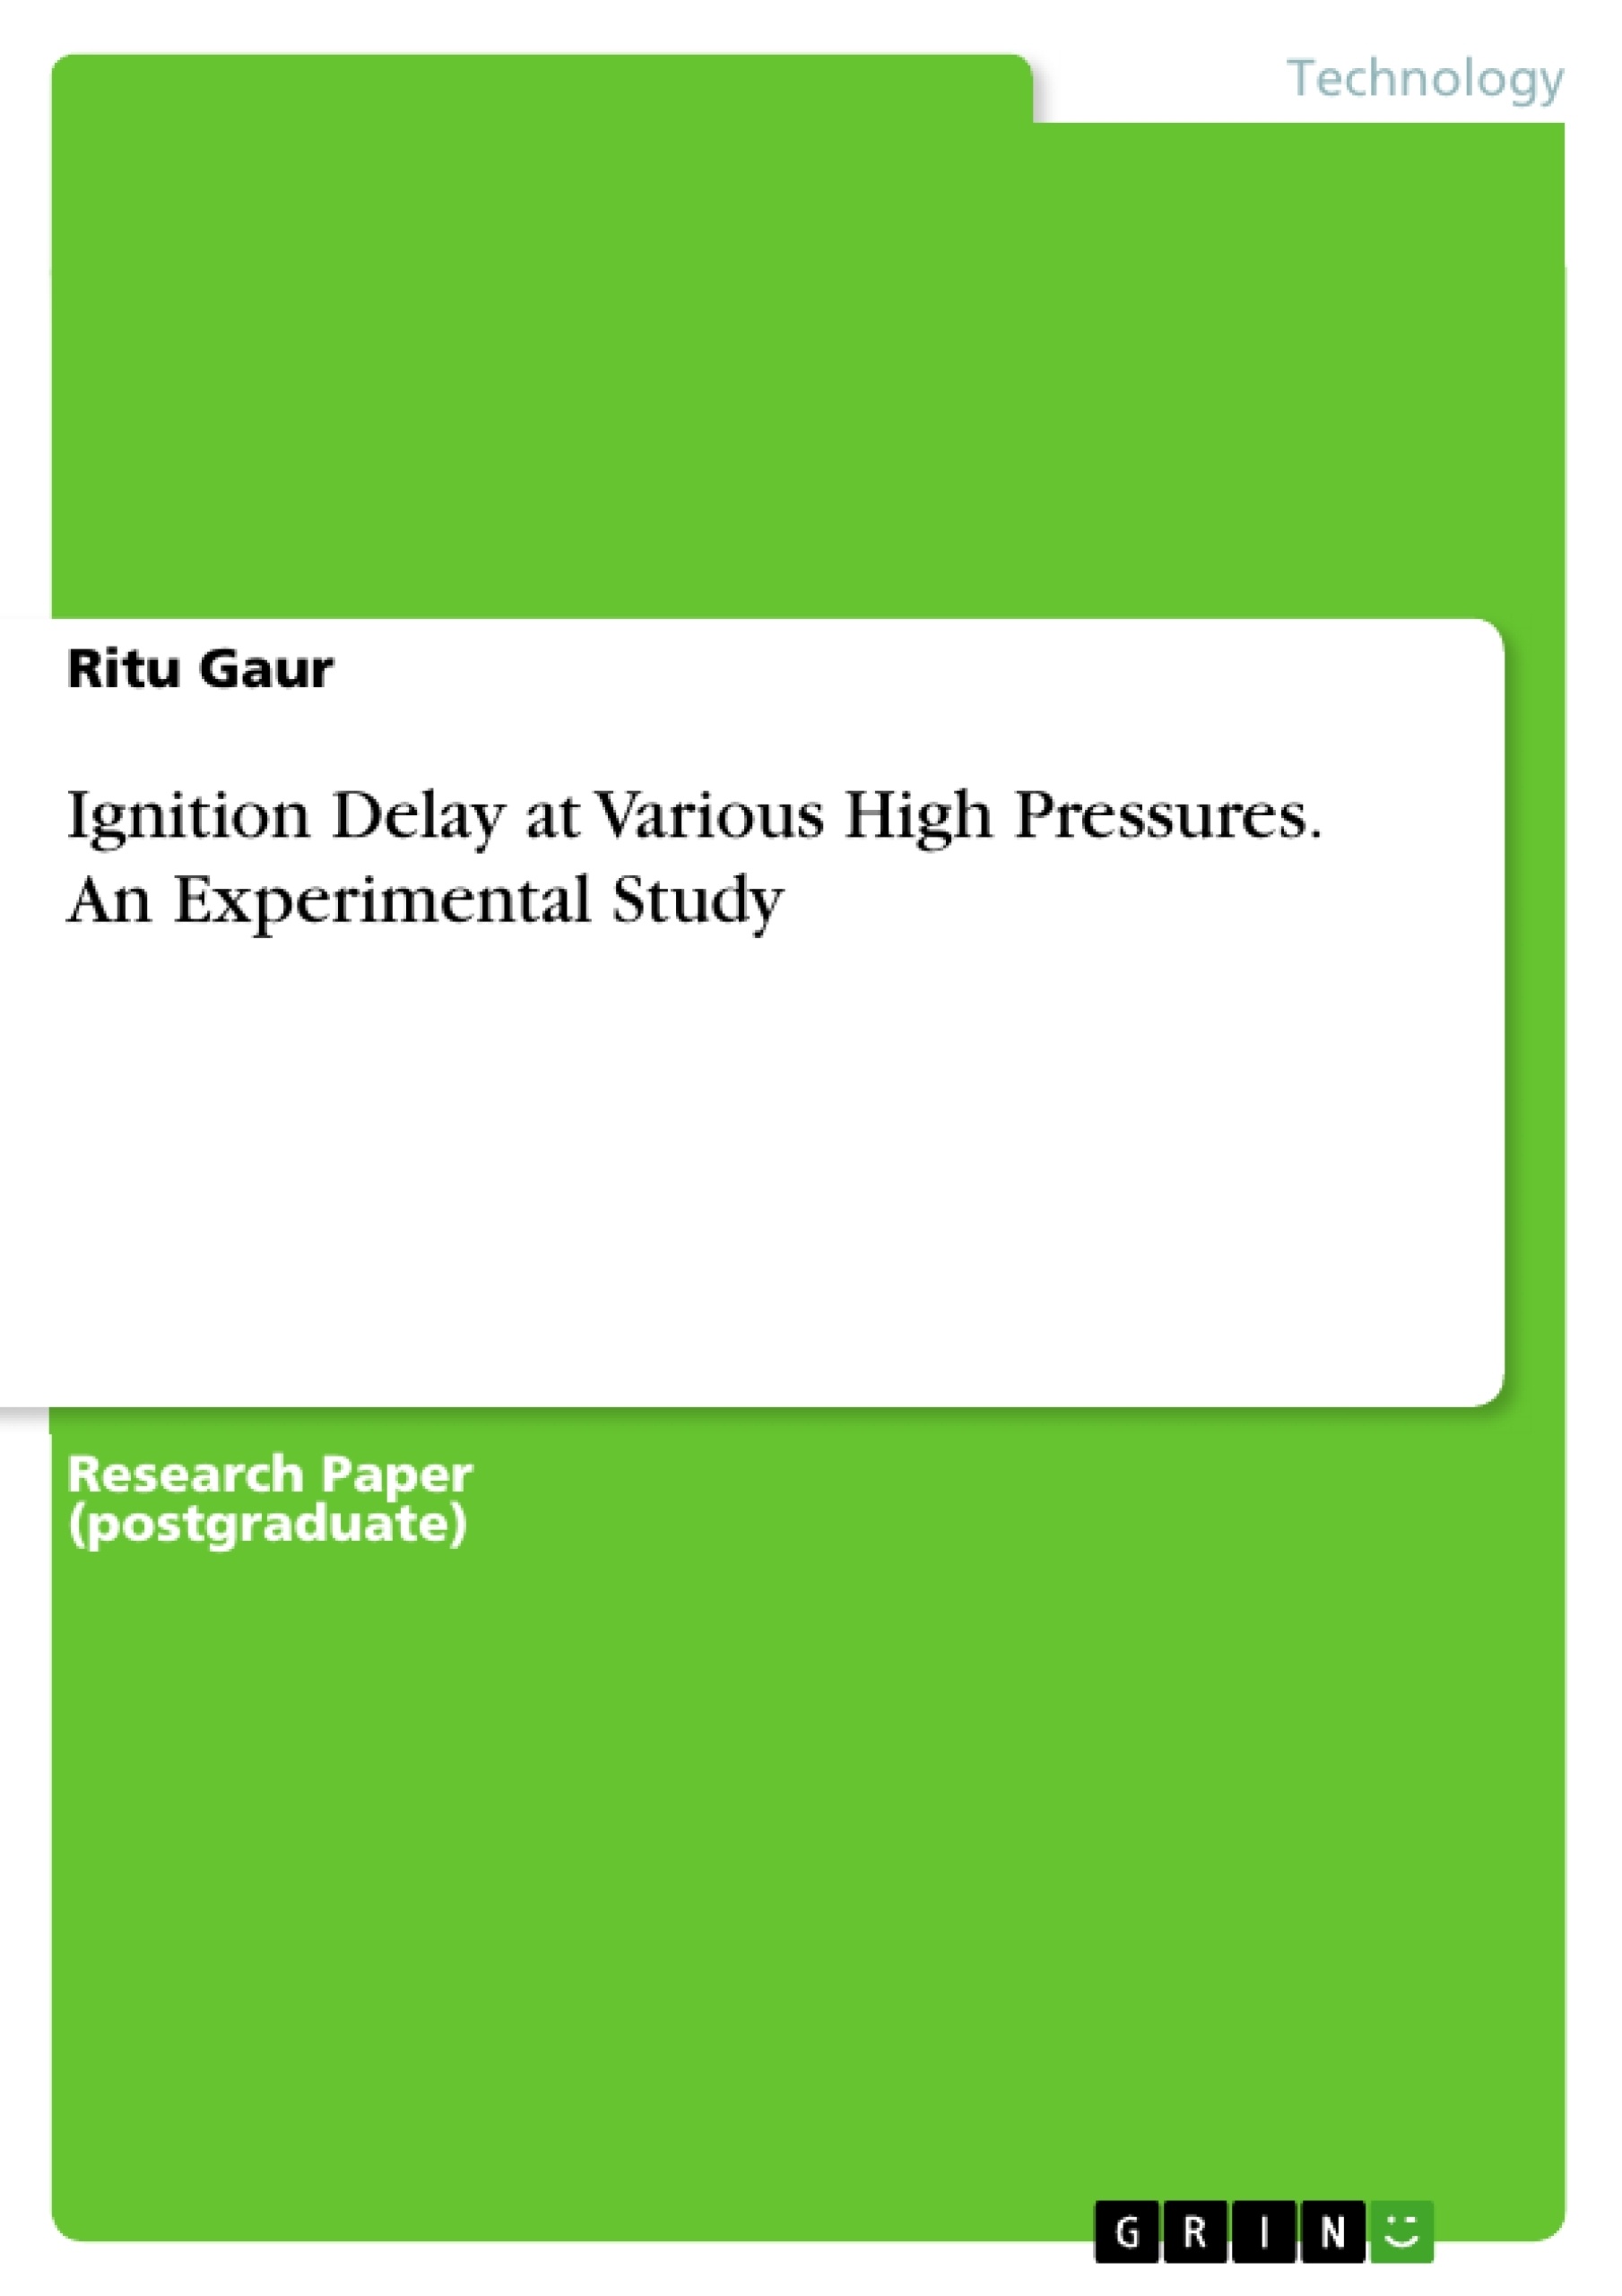 Titre: Ignition Delay at Various High Pressures. An Experimental Study